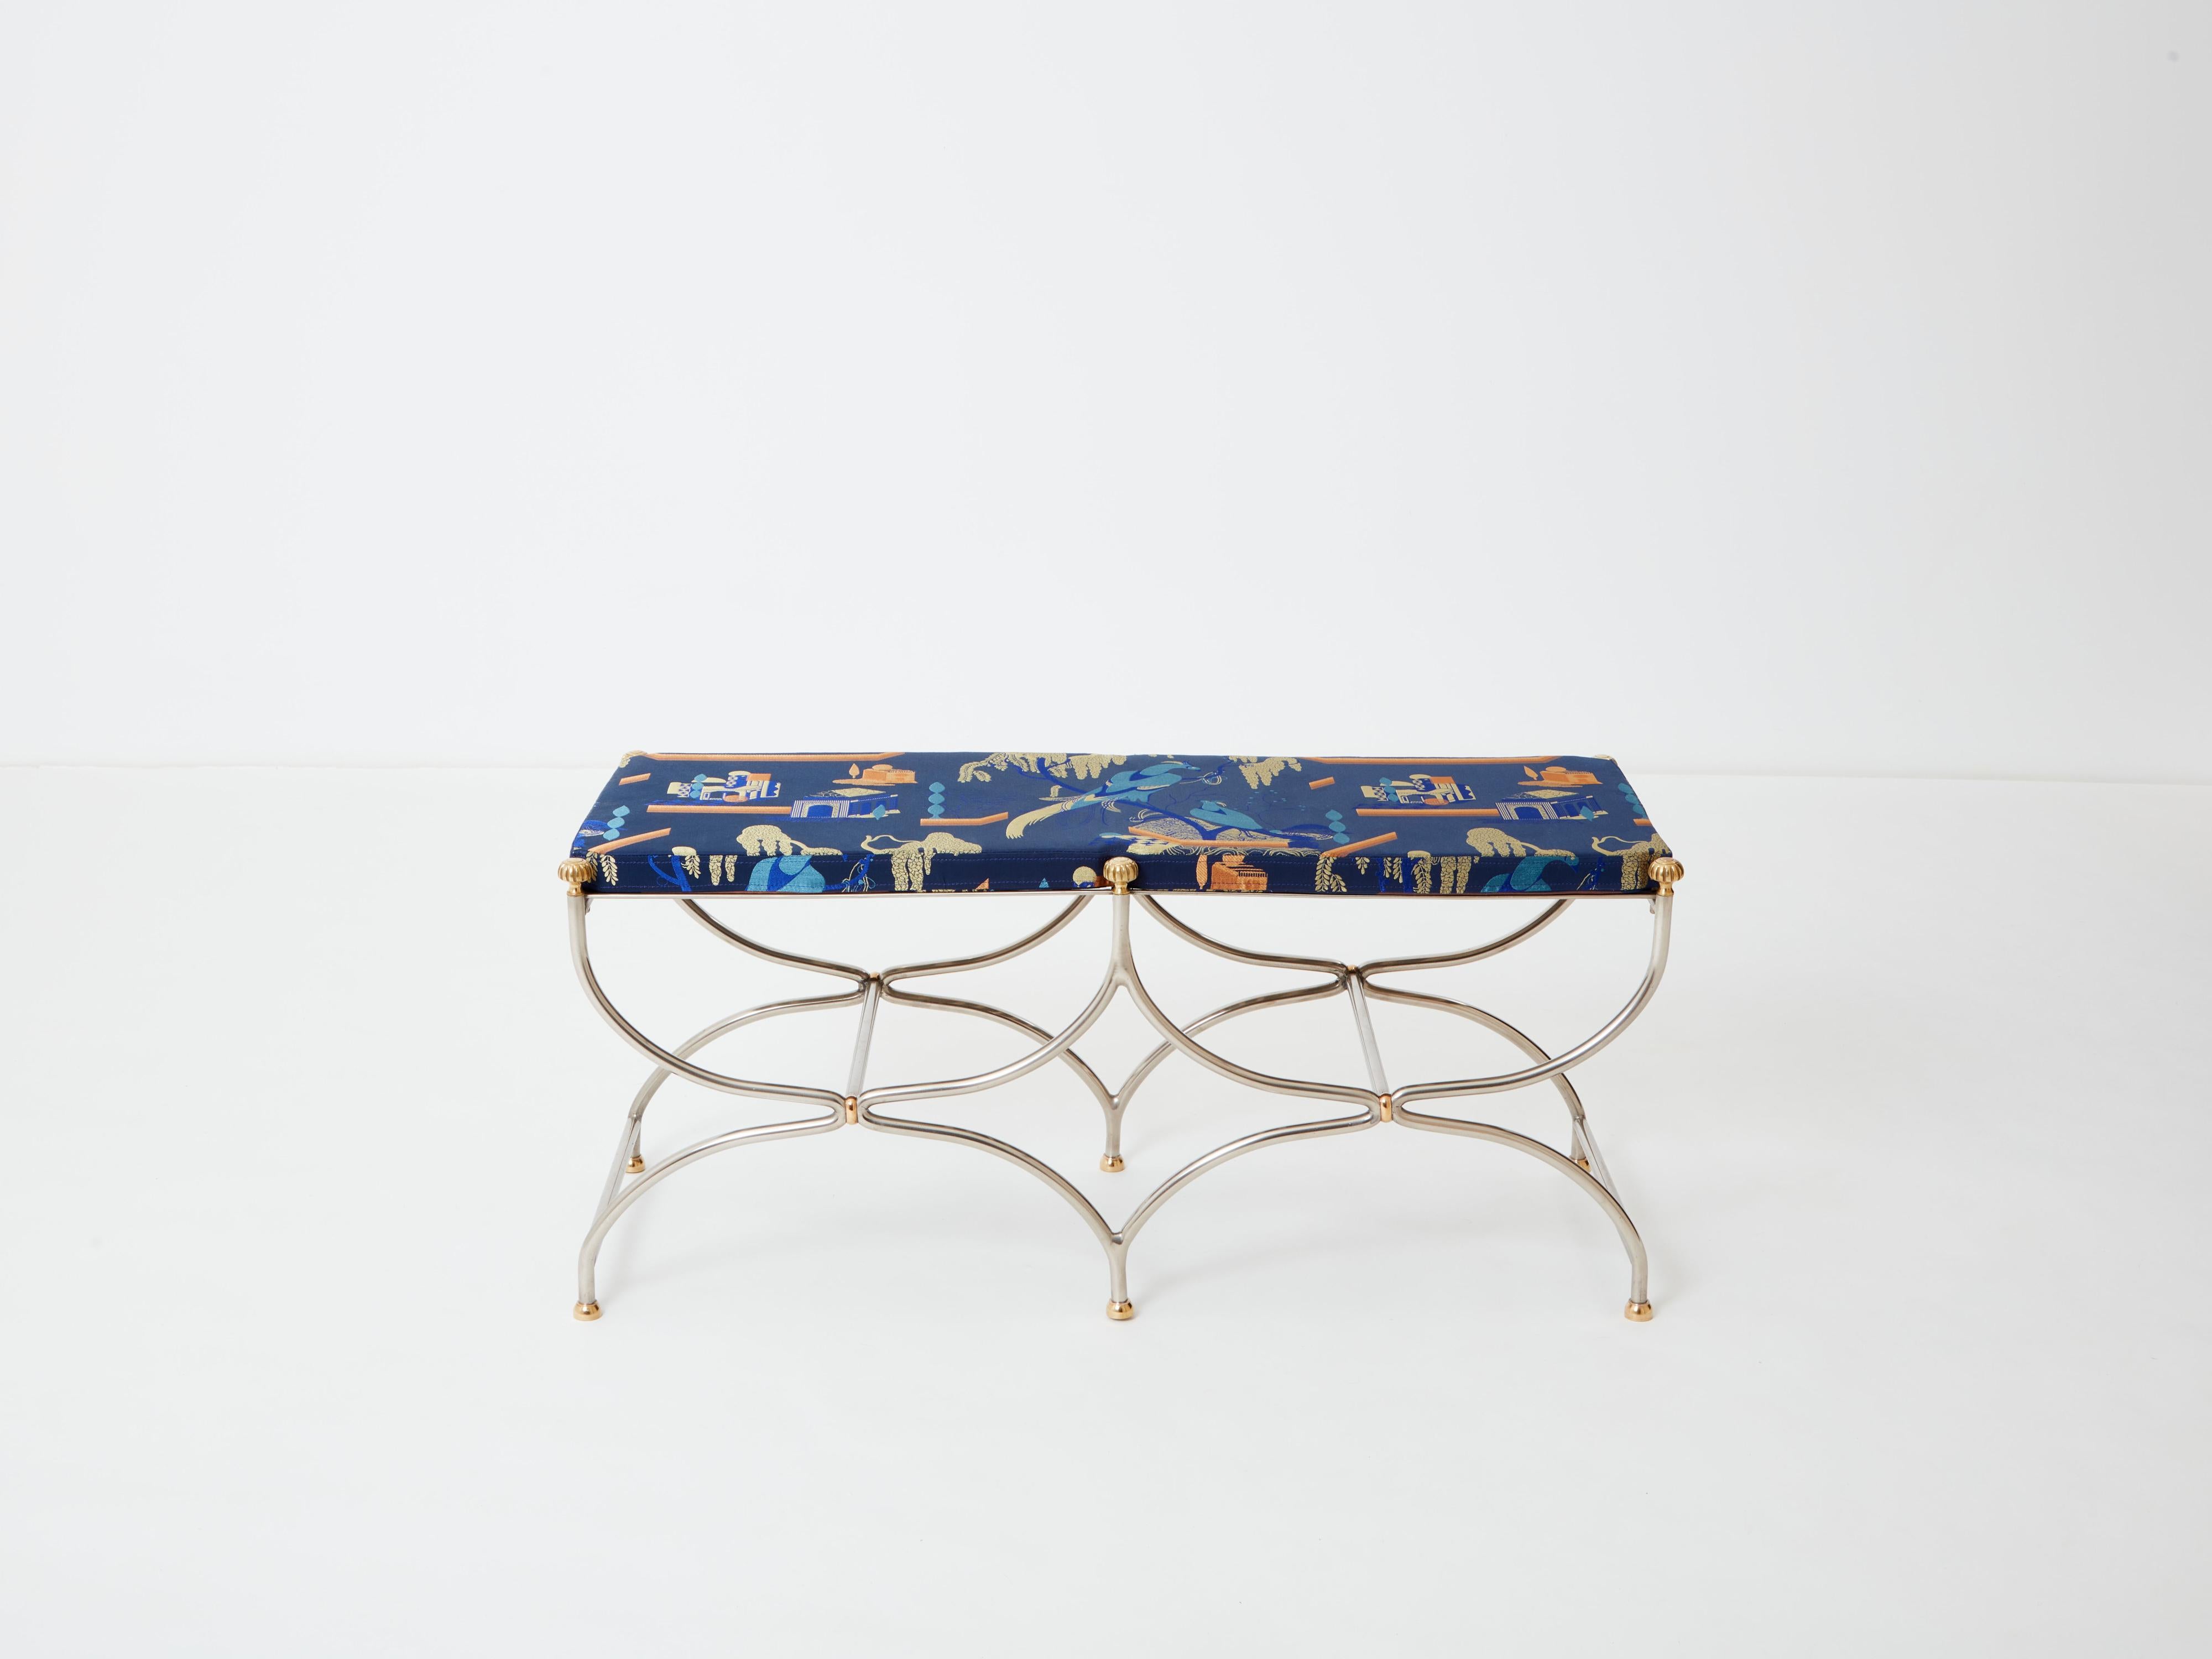 Beautiful 1960’s Curule Savonarola bench made of heavy stainless steel metal with brass accents. This timeless bench was created by French interior design firm Maison Jansen in the early sixties. The sparse original structure feels like a piece of